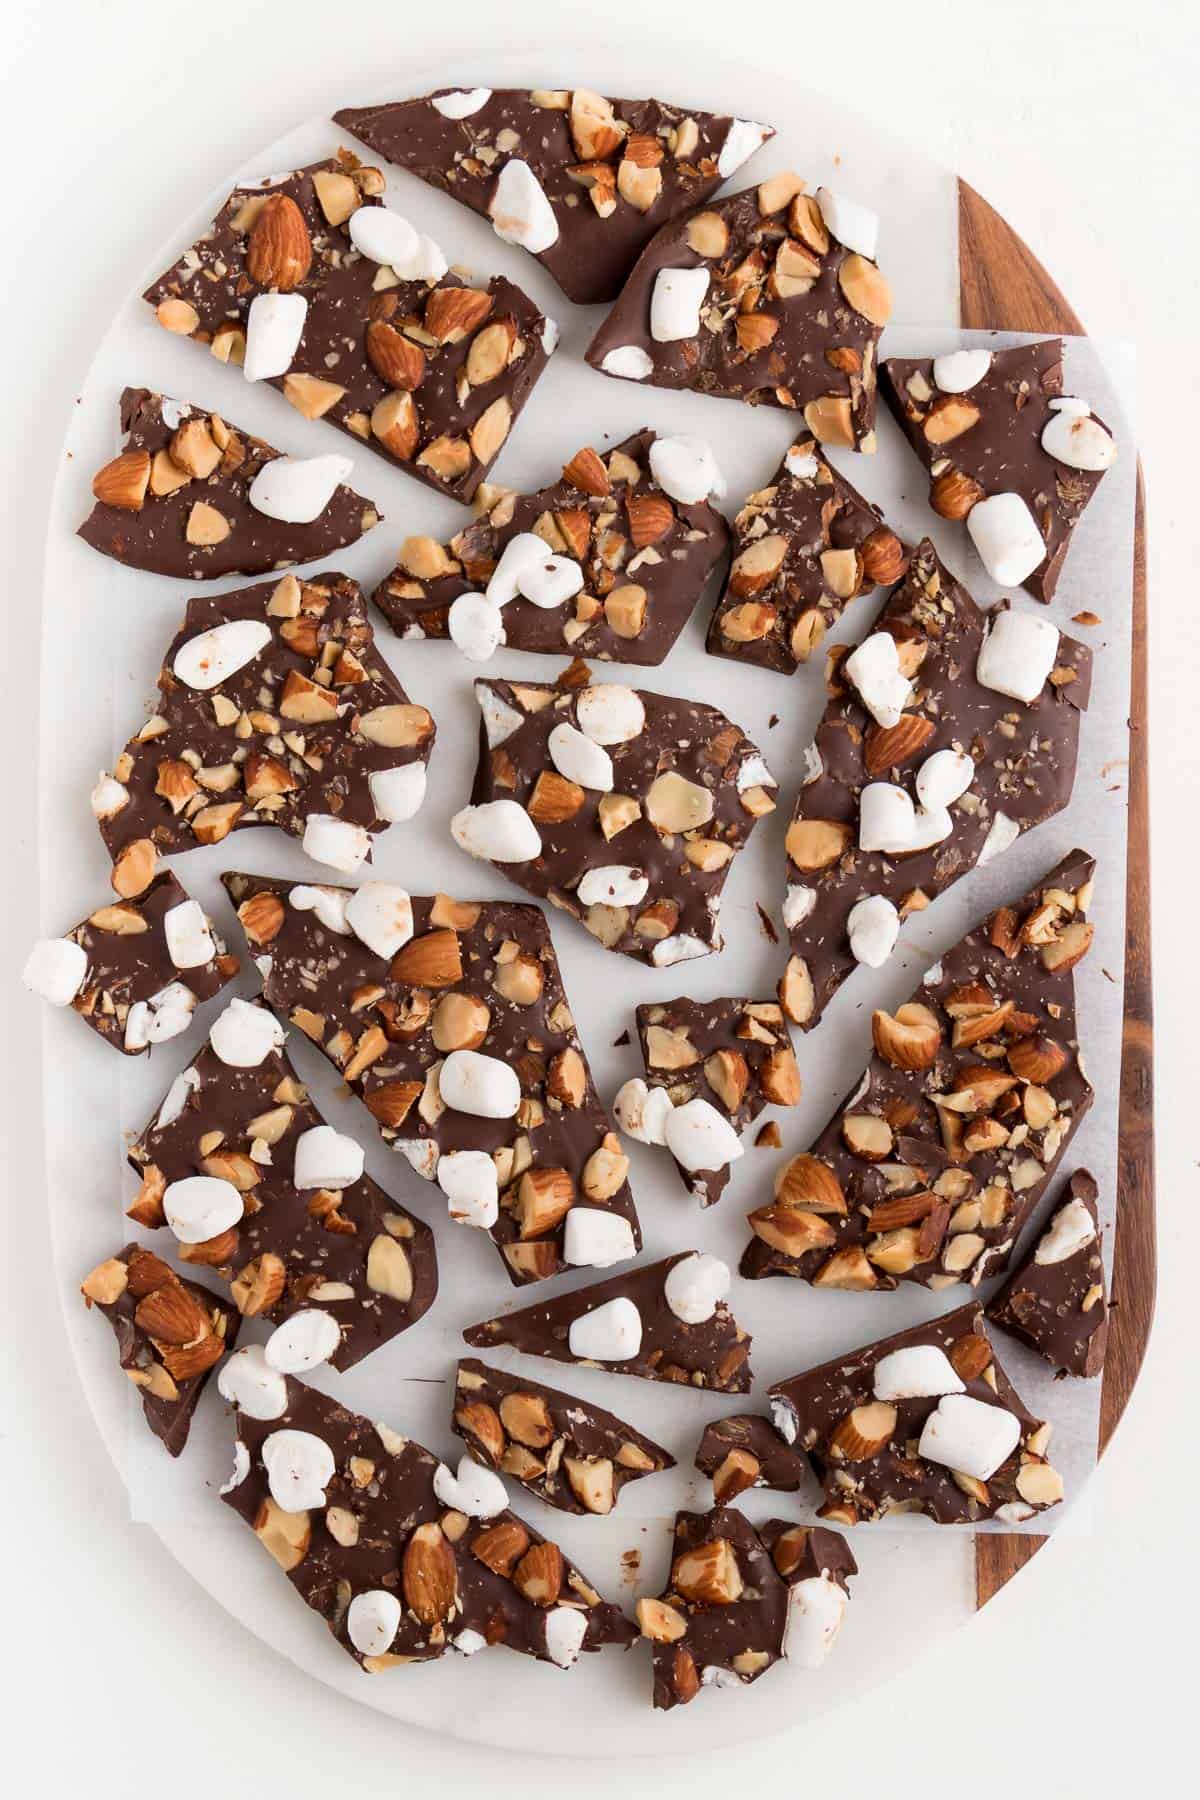 pieces of chocolate bark with almonds and marshmallows on top of a white marble and wood cutting board